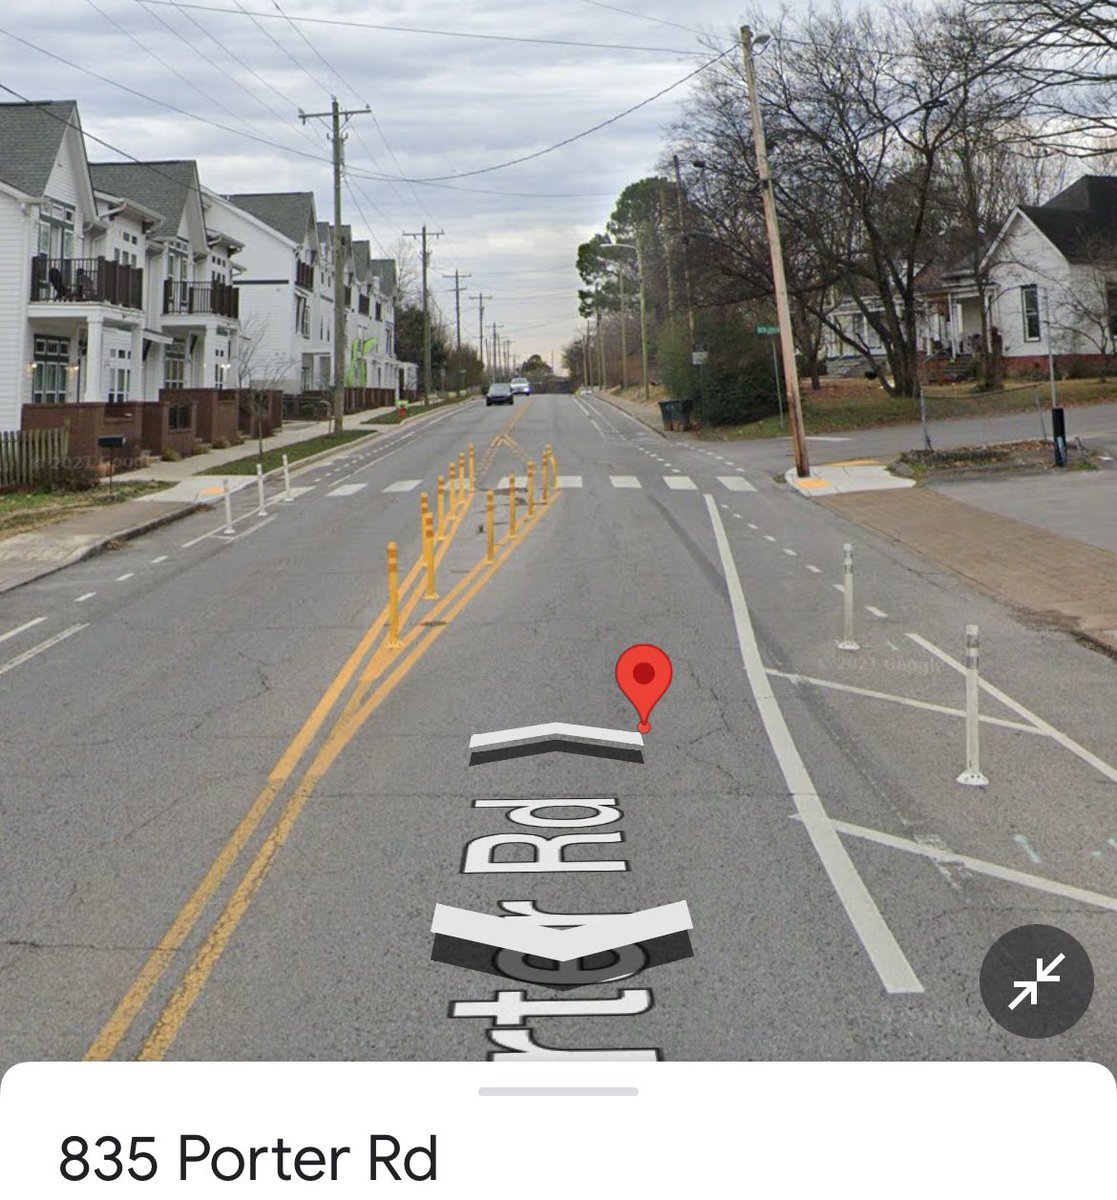 Design Adjustments to slow cars towards that 30mph speed would be yellow posts in the middle yellow & white posts in the bike lane buffer. Vertical Physical objects slow drivers down bc they have to pay attention to not drift & hit one.